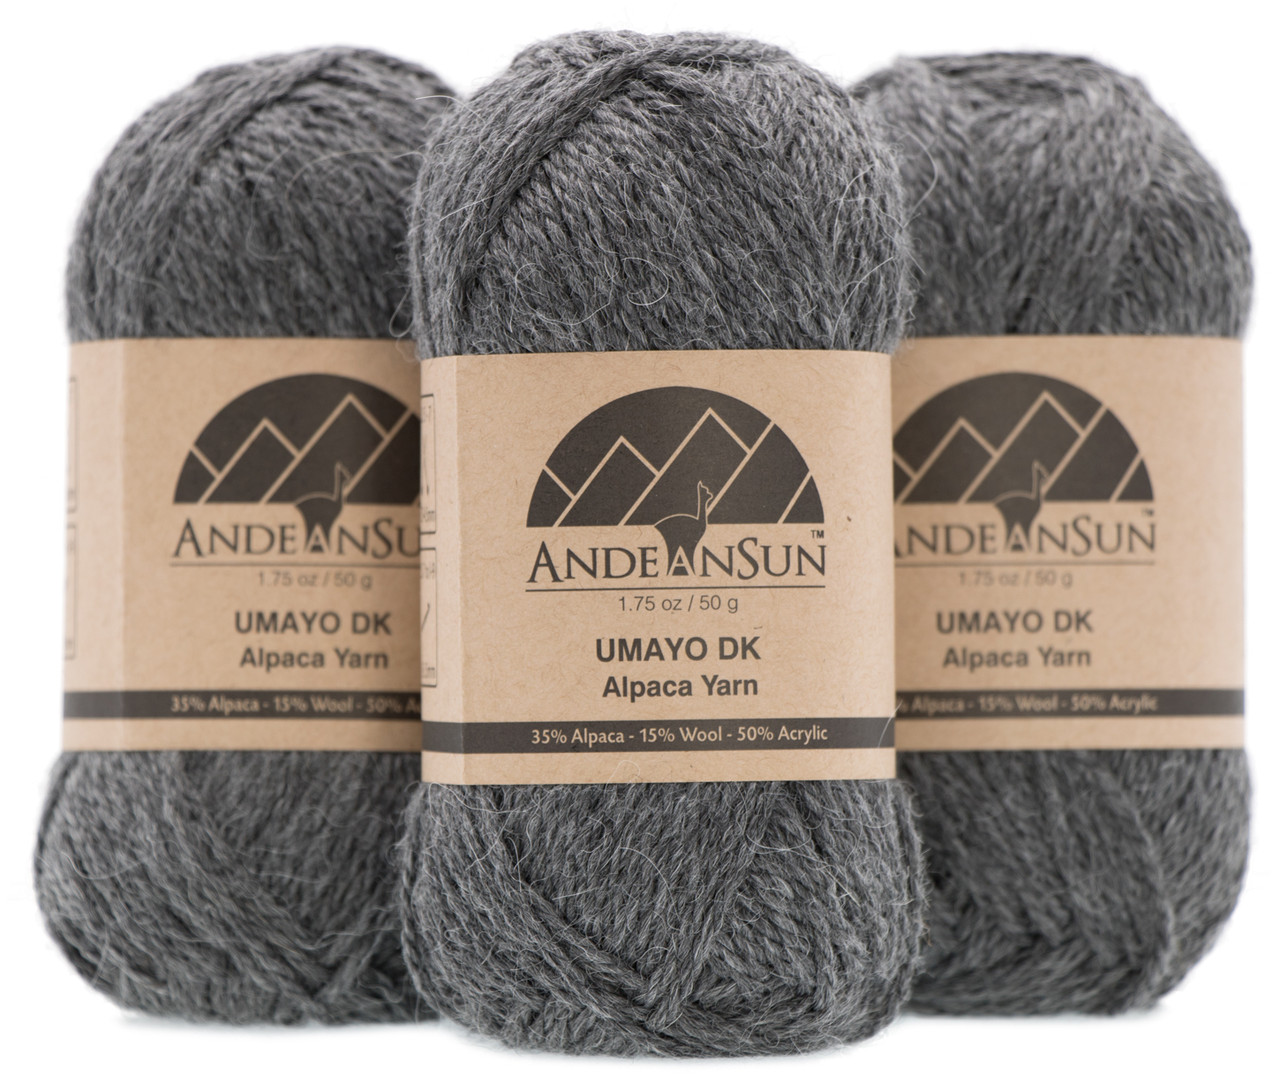 AndeanSun 100% baby alpaca yarn (weight #3) dk - set of 3 - andeansun -  luxuriously soft for knitting, crocheting - great for baby garmen